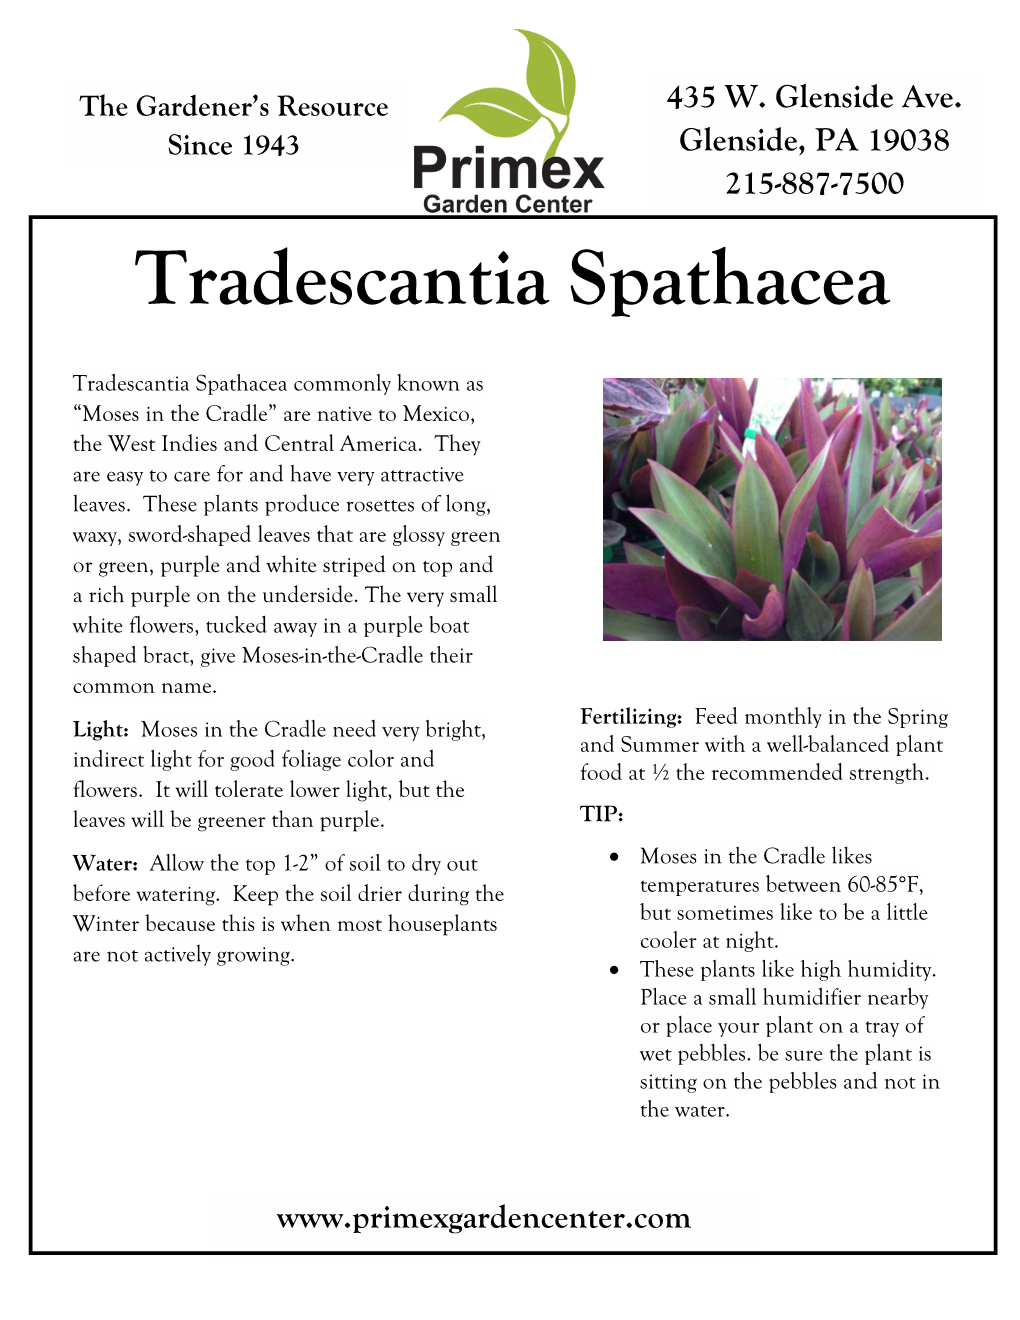 Tradescantia Spathacea Moses in the Cradle Tradescantia Spathacea Commonly Known As “Moses in the Cradle” Are Native to Mexico, the West Indies and Central America